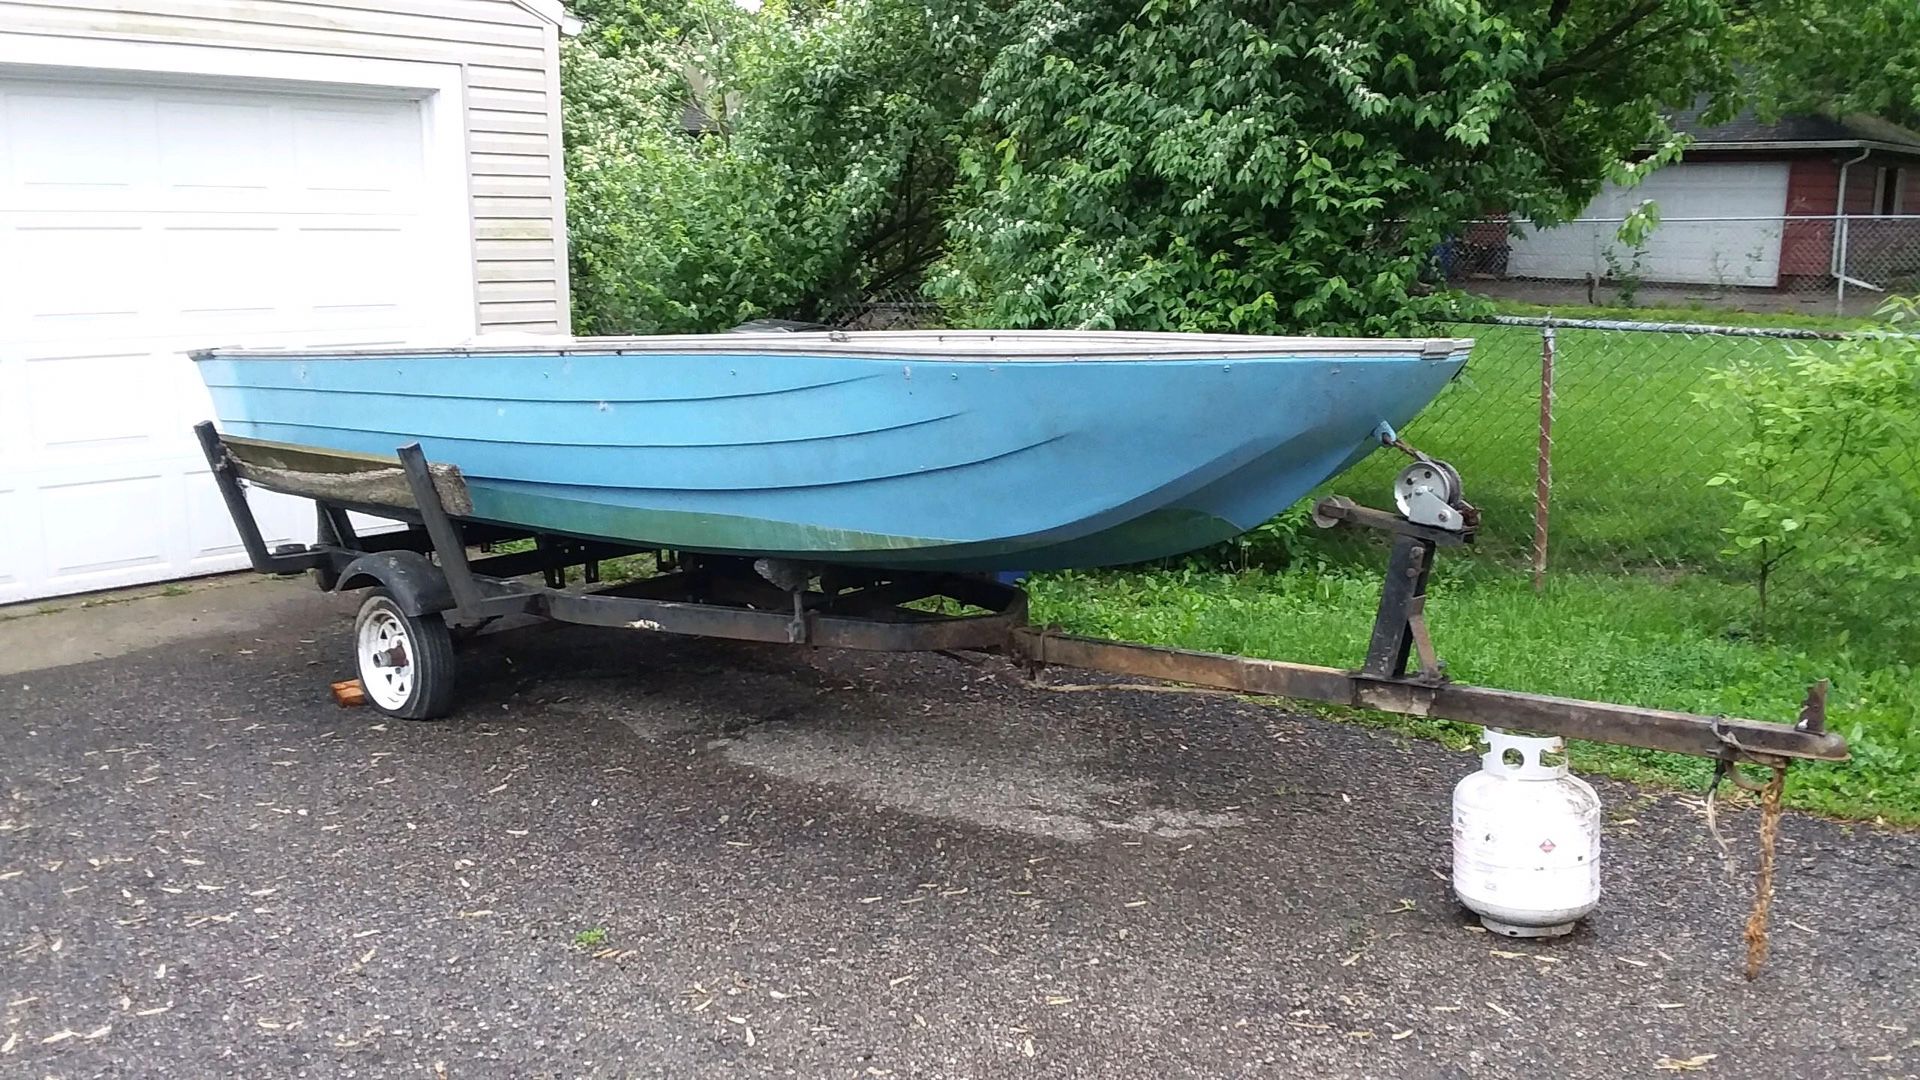 Boat for sale ( moving need it gone) 14 1/2 ft long by 5 ft wide make an offer